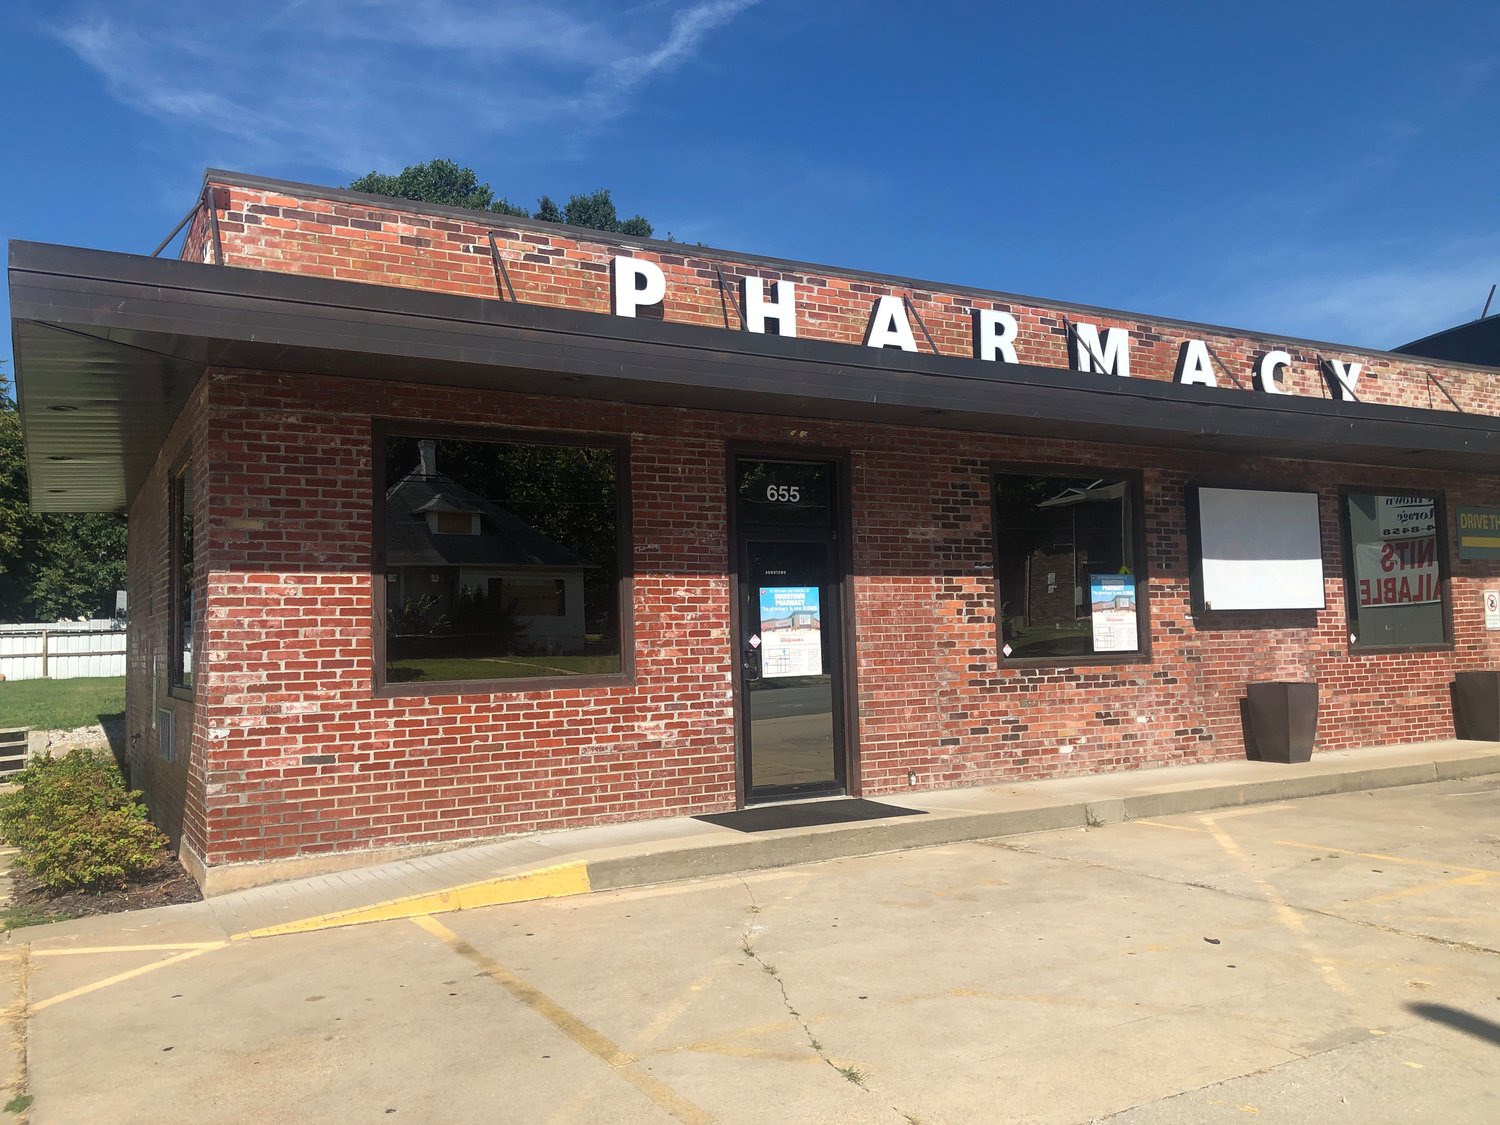 Downtown Pharmacy's prescription records have been transferred to a nearby Walgreens store, according to signage posted to the windows of the store.